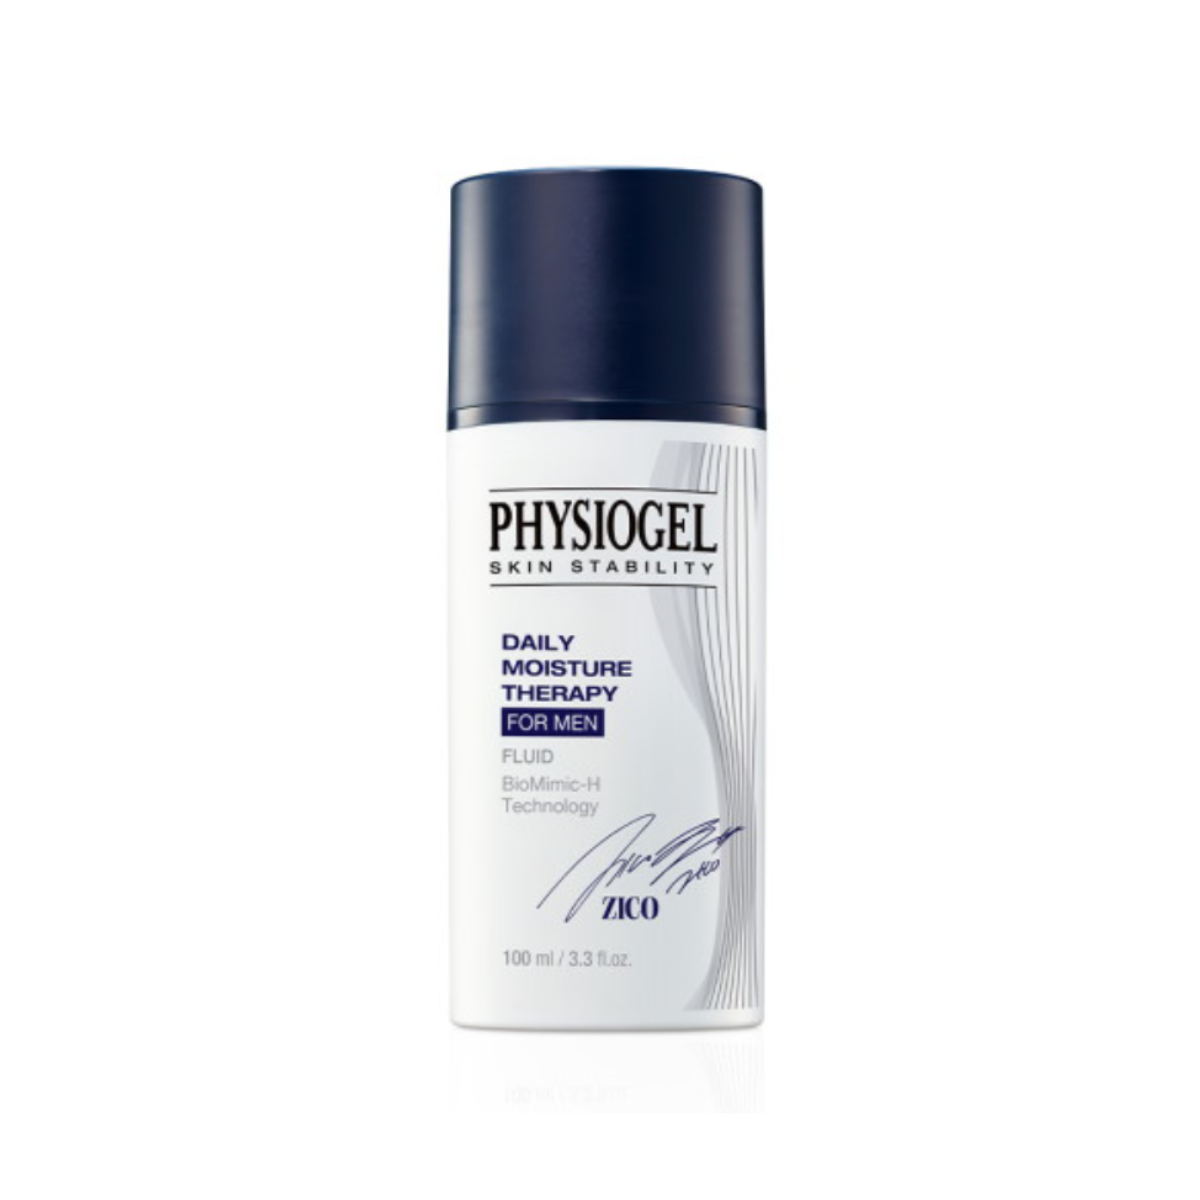 PHYSIOGEL Daily Moisture Therapy for Men Fluid 100ml - DODOSKIN